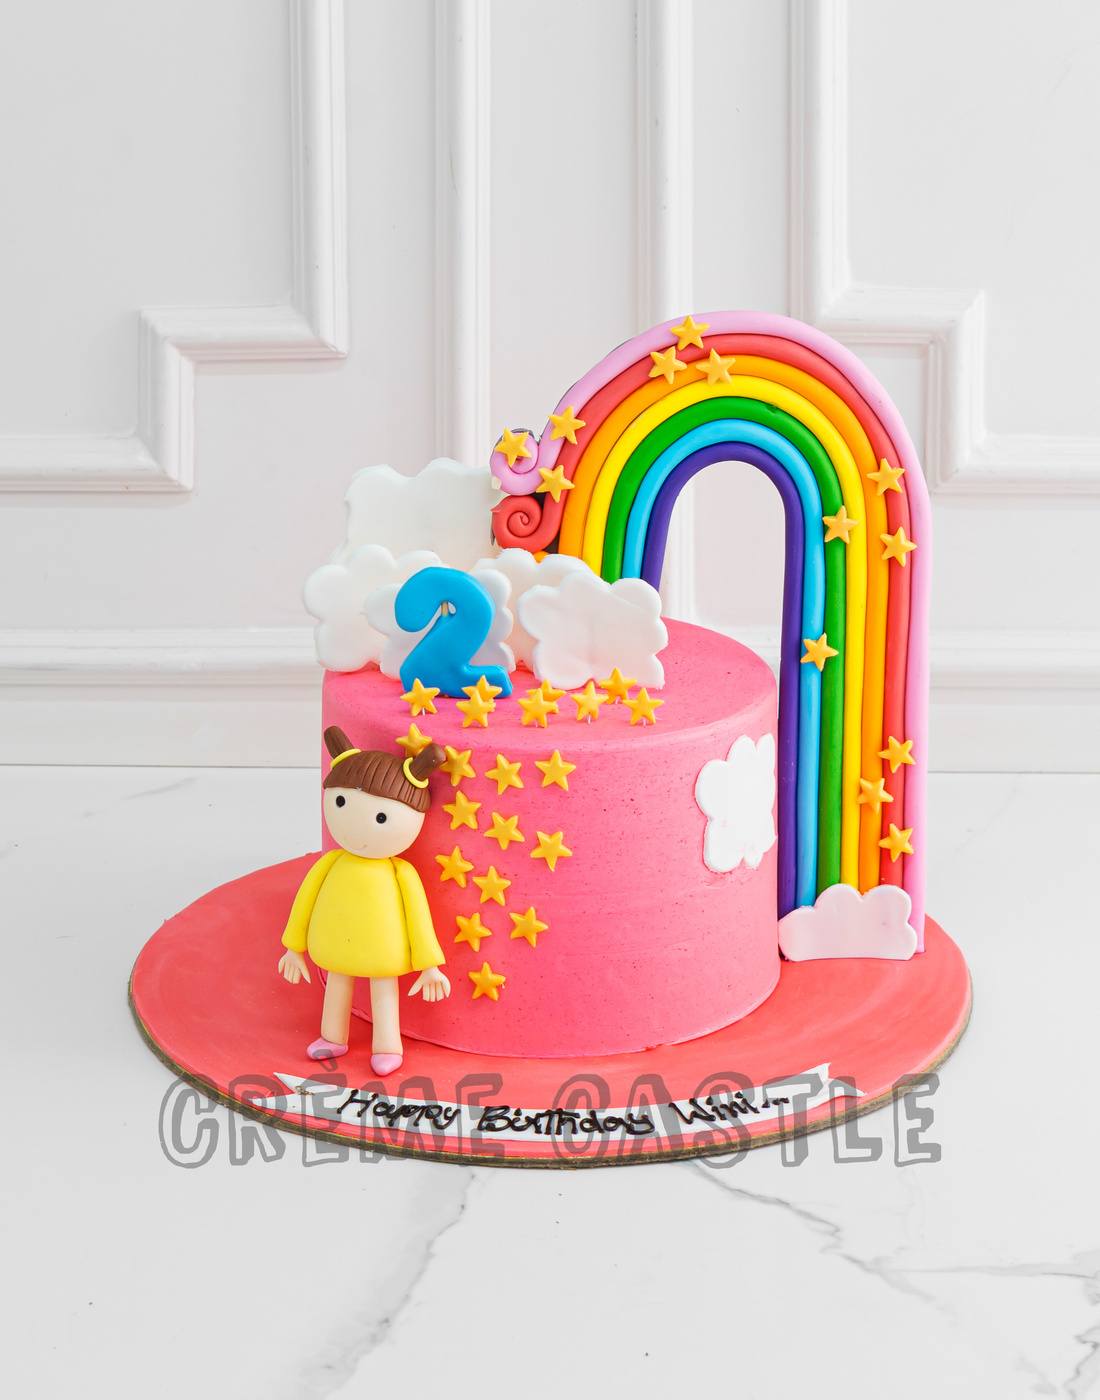 2 Tiers | Girls Series | Baby Mermaid | For Kids | Birthday Cake Malaysia  Supplier, Services, Professional, Wholesaler | Hen Chen Food Industry Sdn.  Bhd.